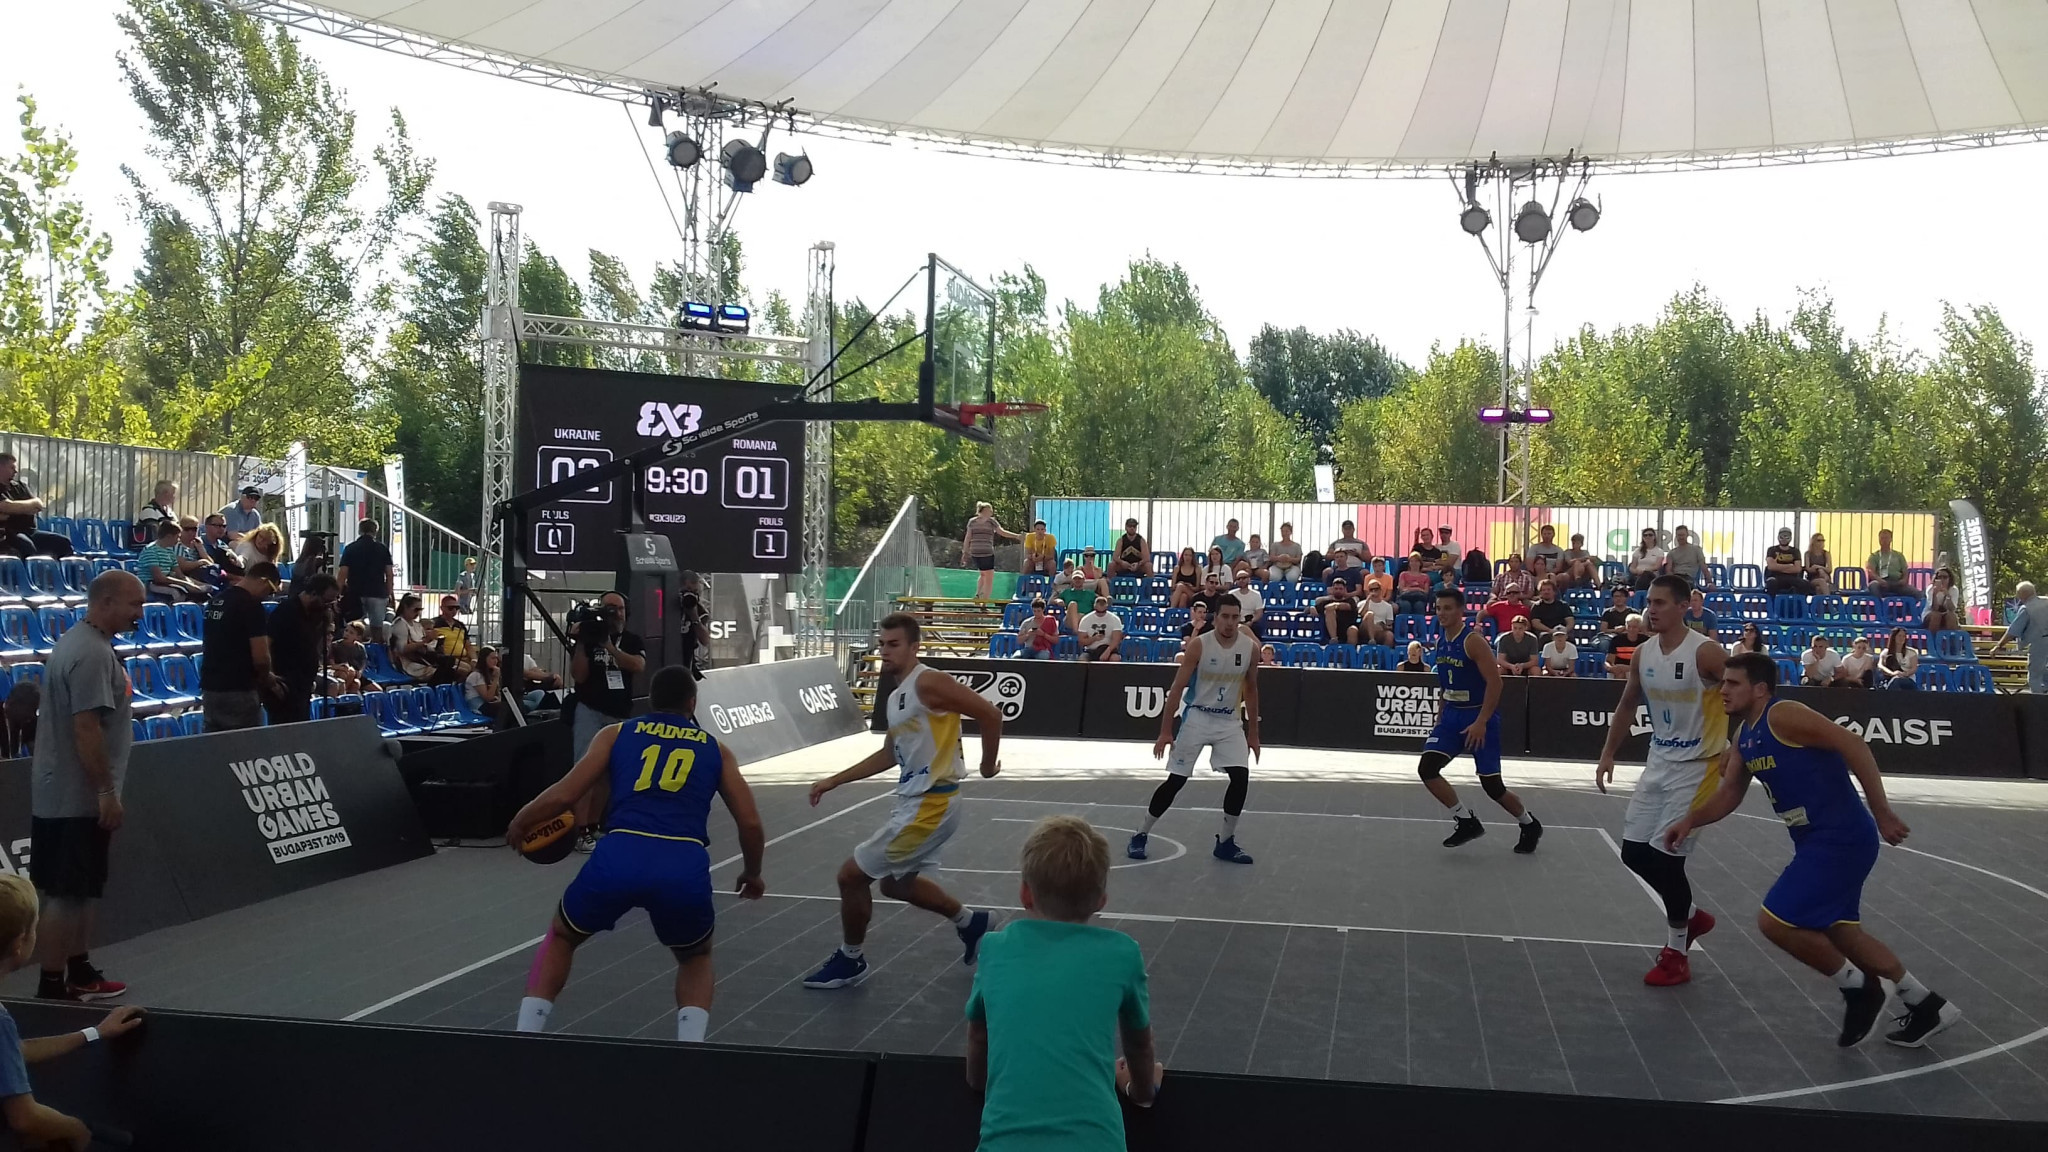 Pool matches in 3x3 basketball continued throughout the day ©ITG